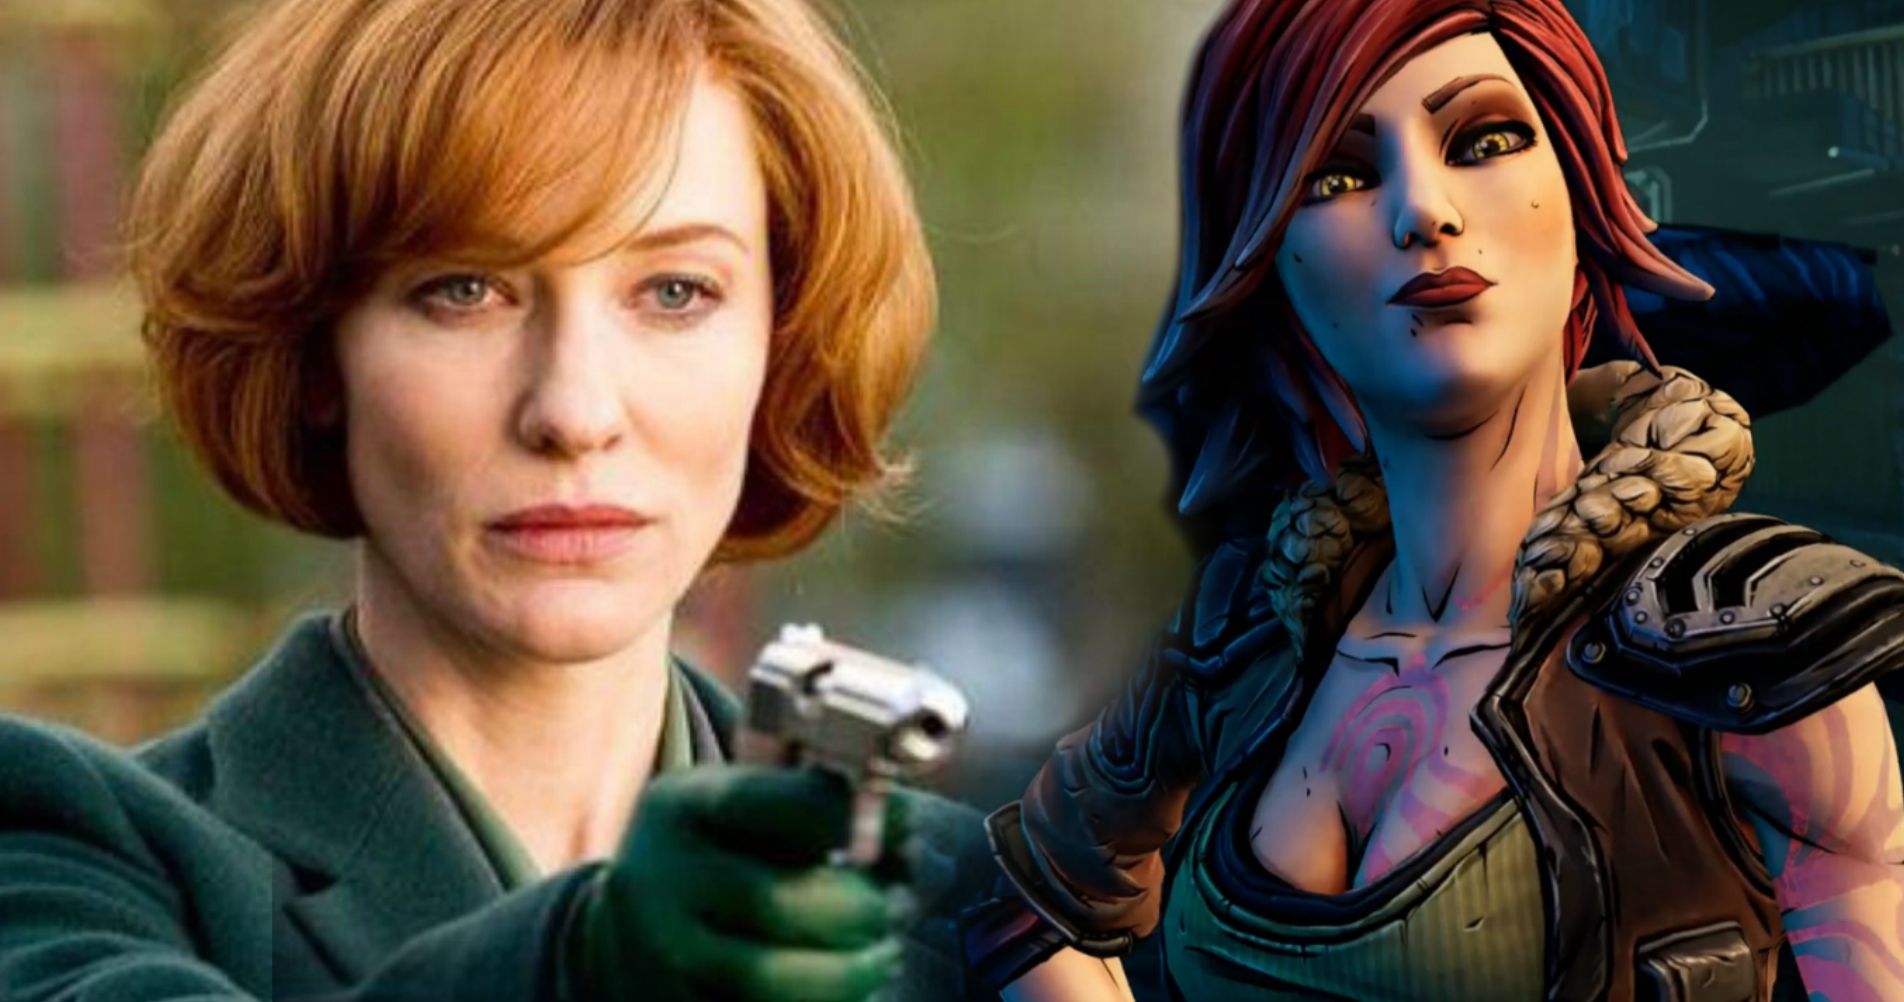 Borderlands Movie Wants Cate Blanchett as Lilith